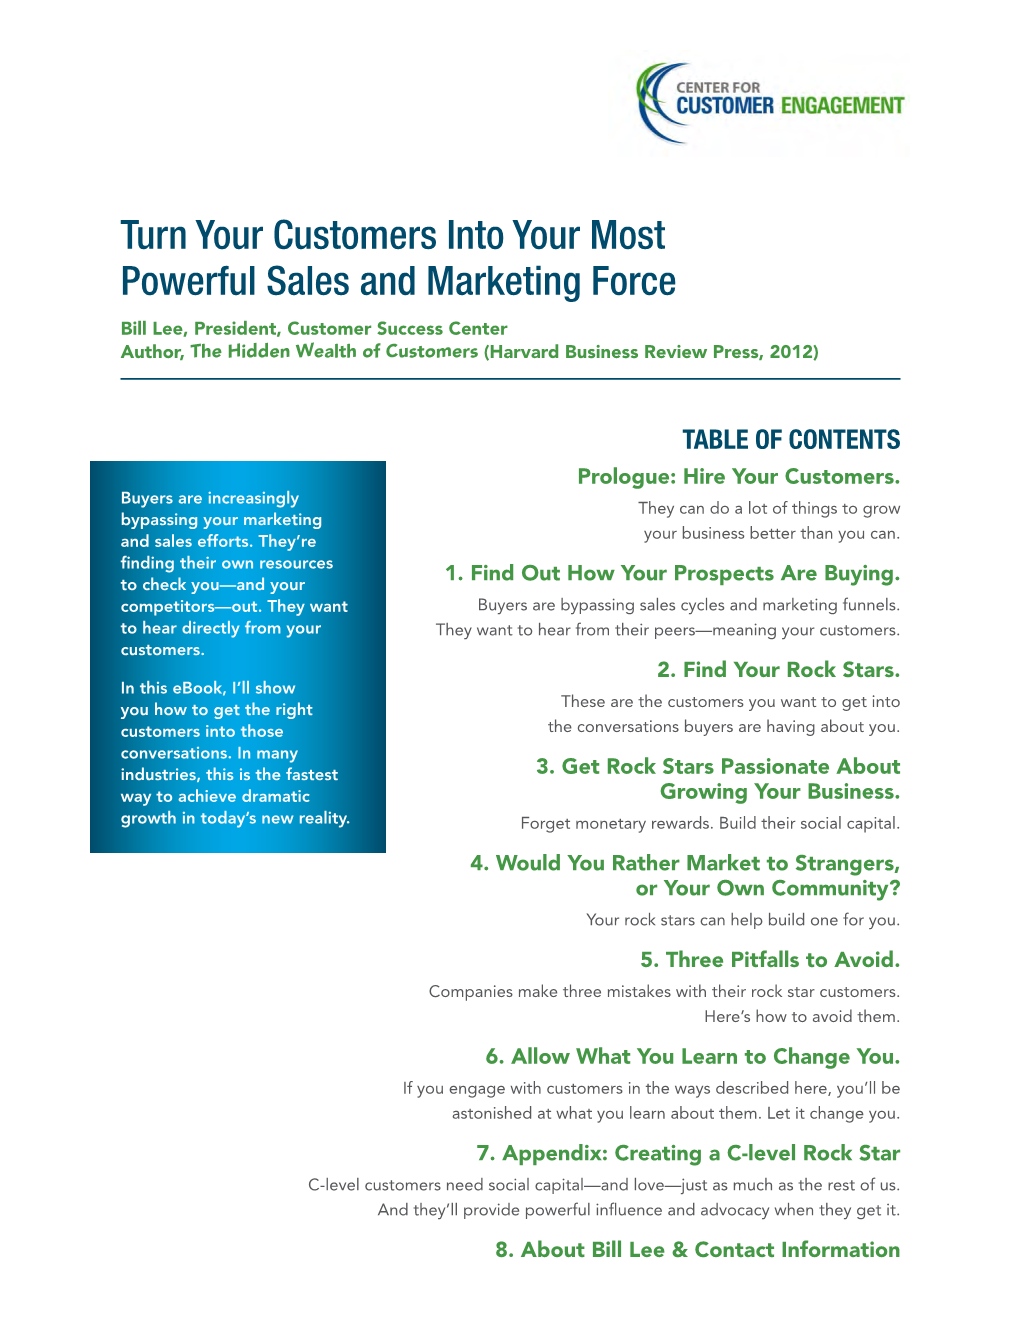 Turn Your Customers Into Your Most Powerful Sales and Marketing Force